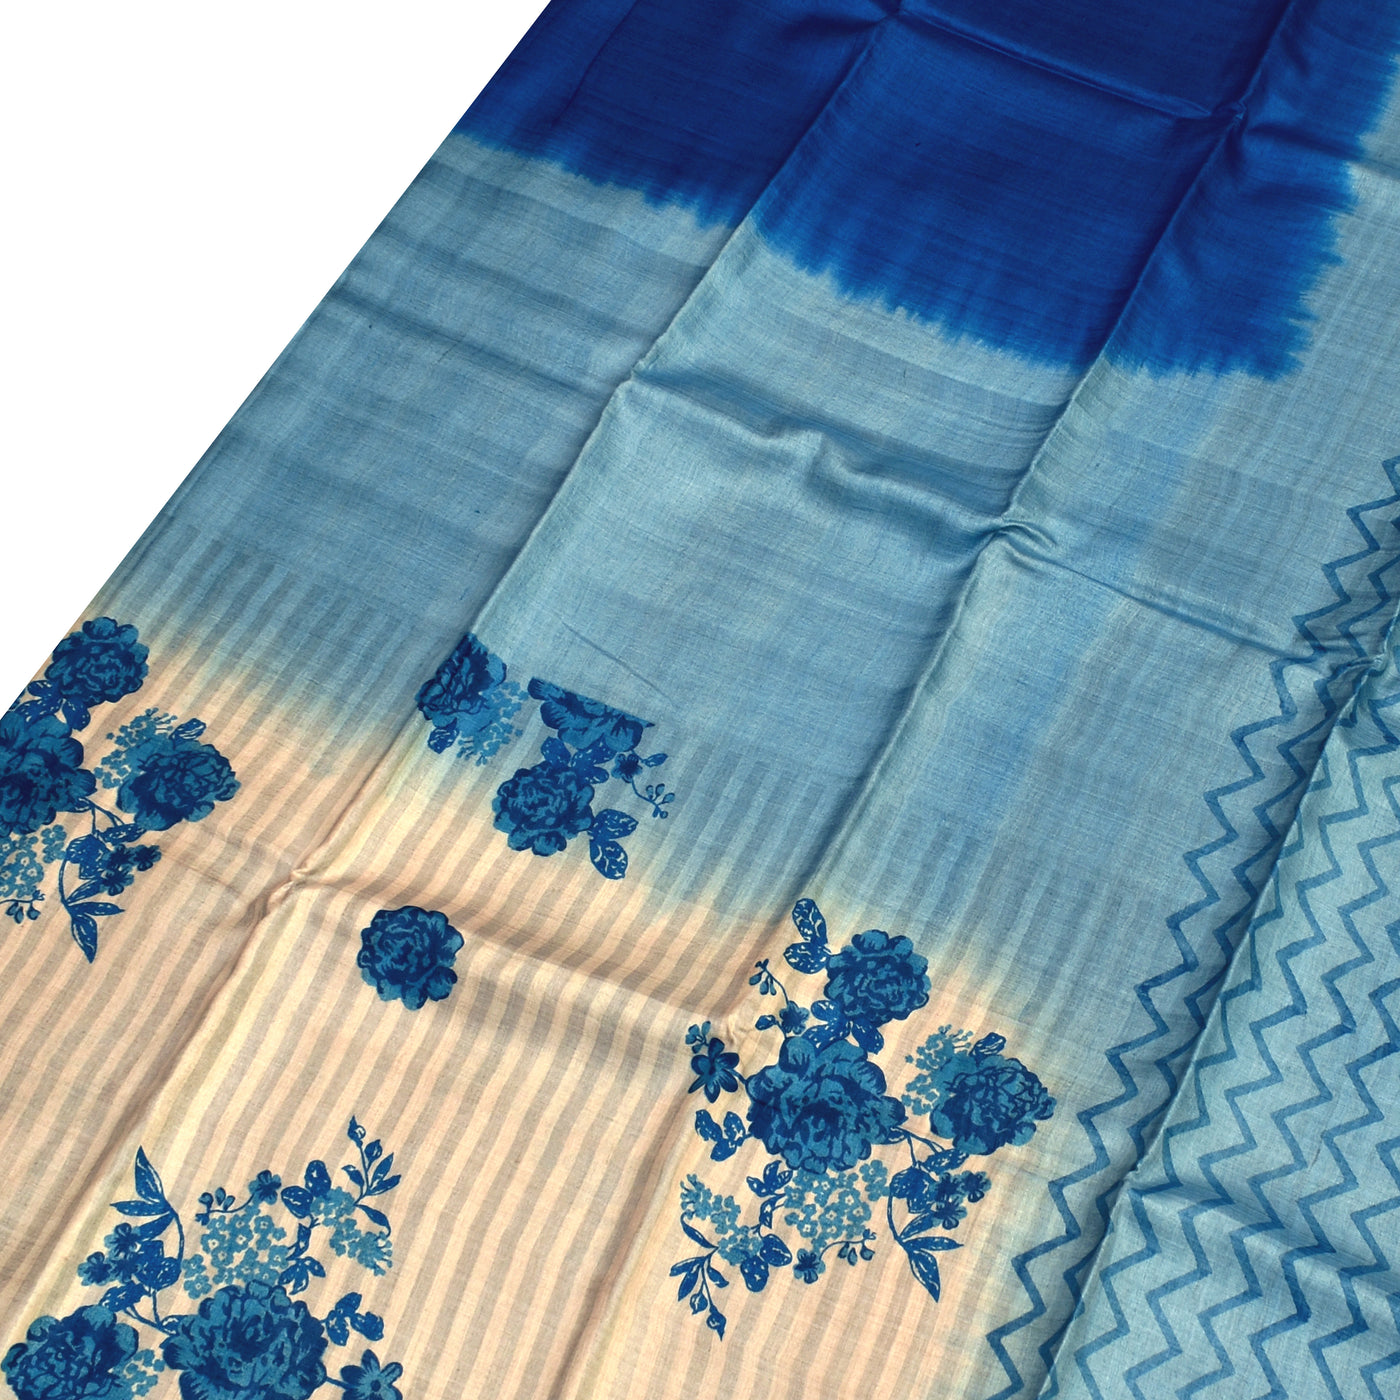 Off White and Navy Blue Tussar Silk Saree with Stripes and Floral Design